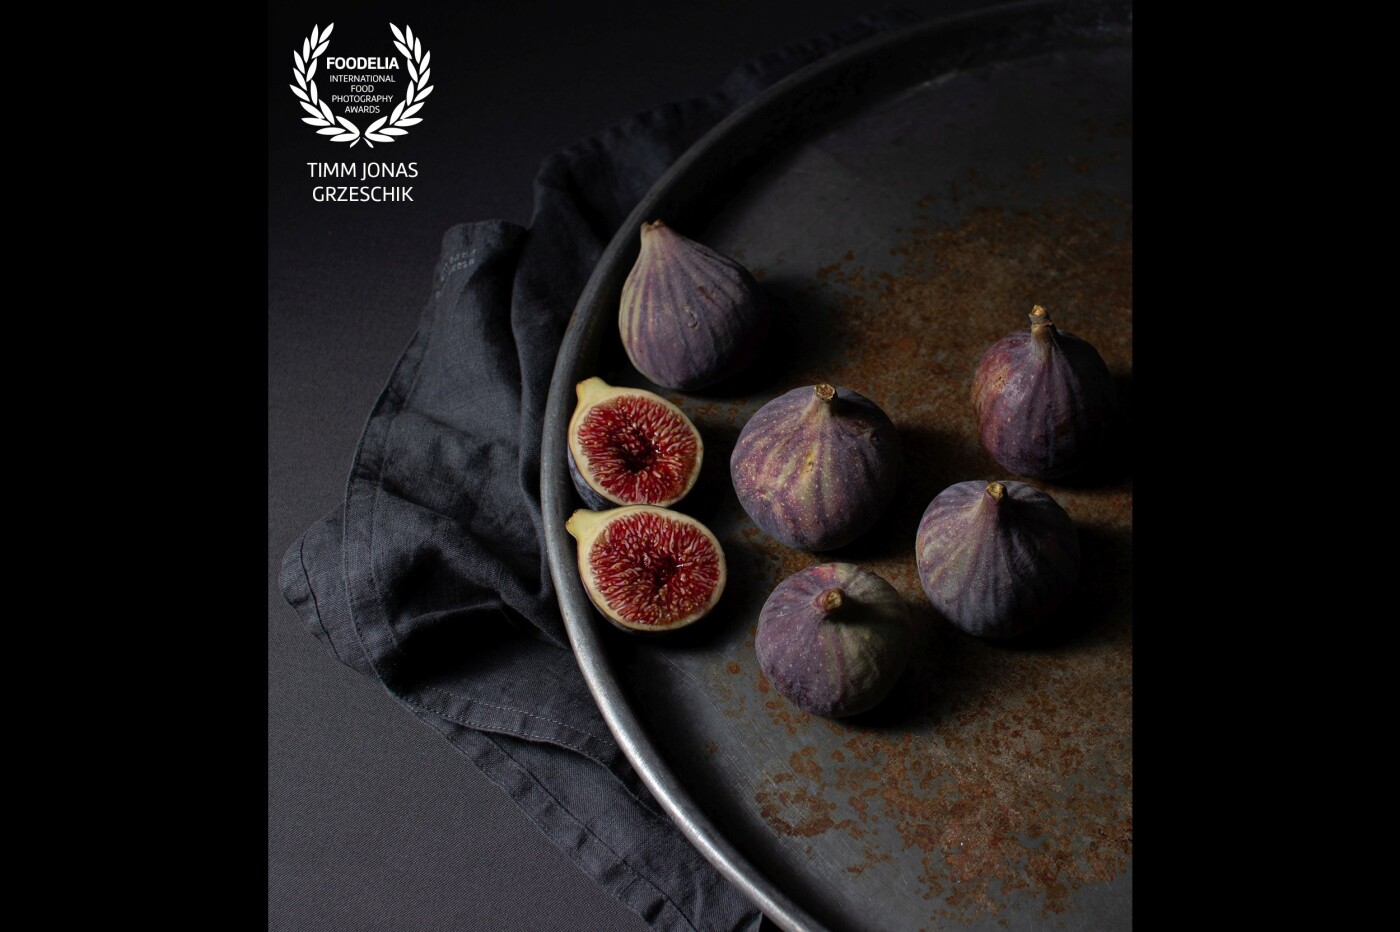 The picture was made for a social media collaboration. The theme was "figs". The dark and slightly mysterious lighting makes the vibrant blood-red color of the figs shining.